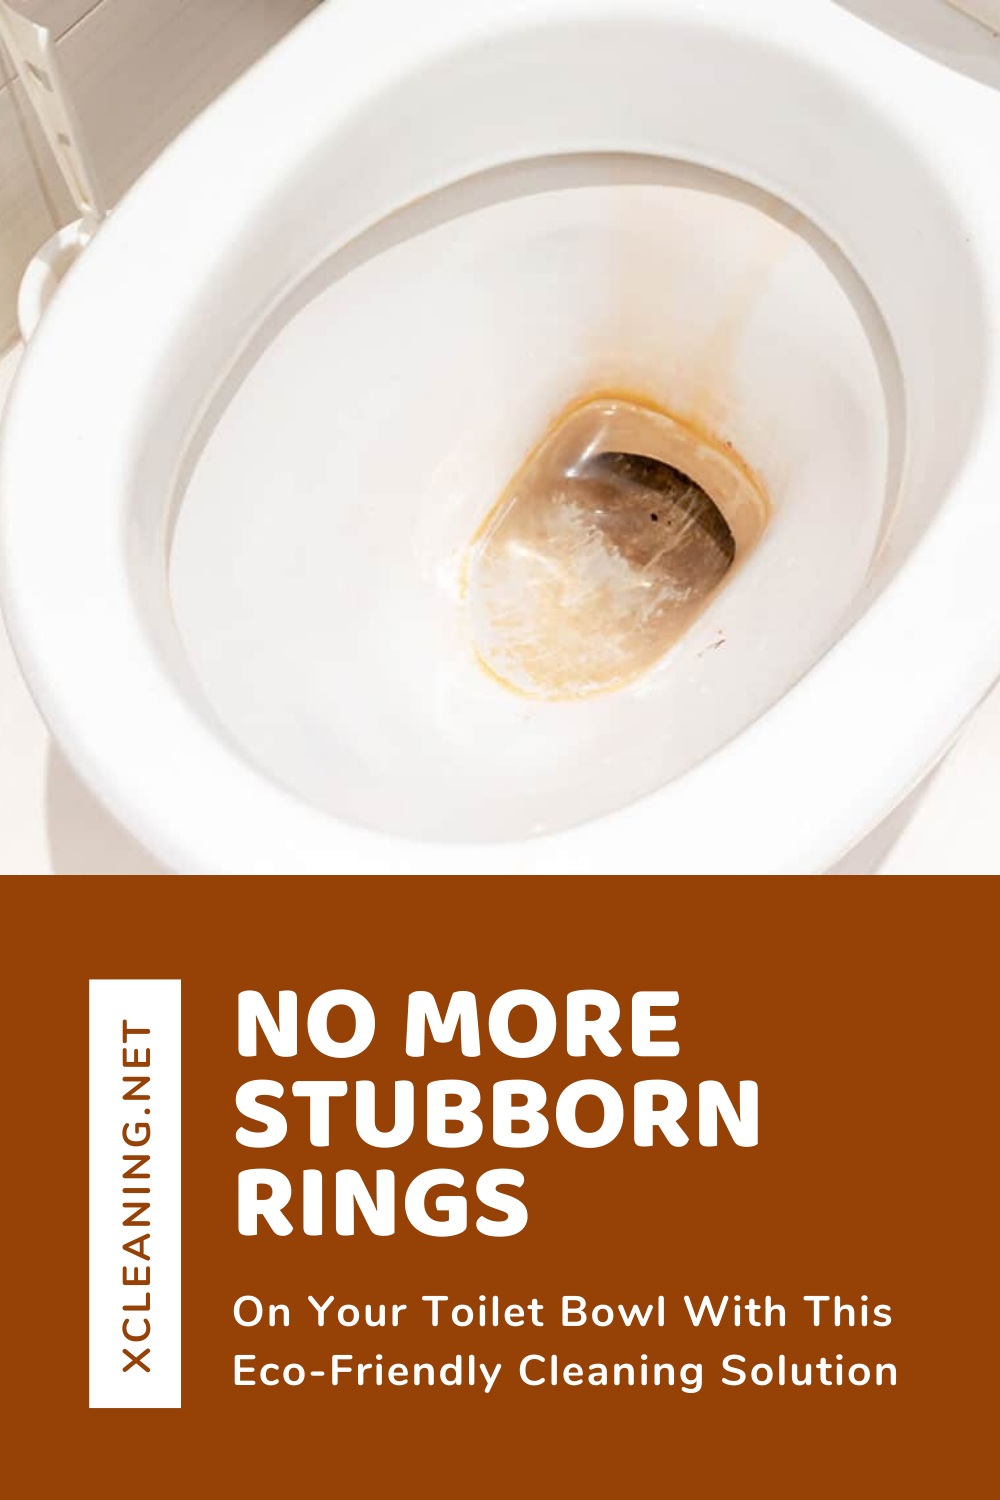 No More Stubborn Rings On Your Toilet Bowl With This Eco-Friendly